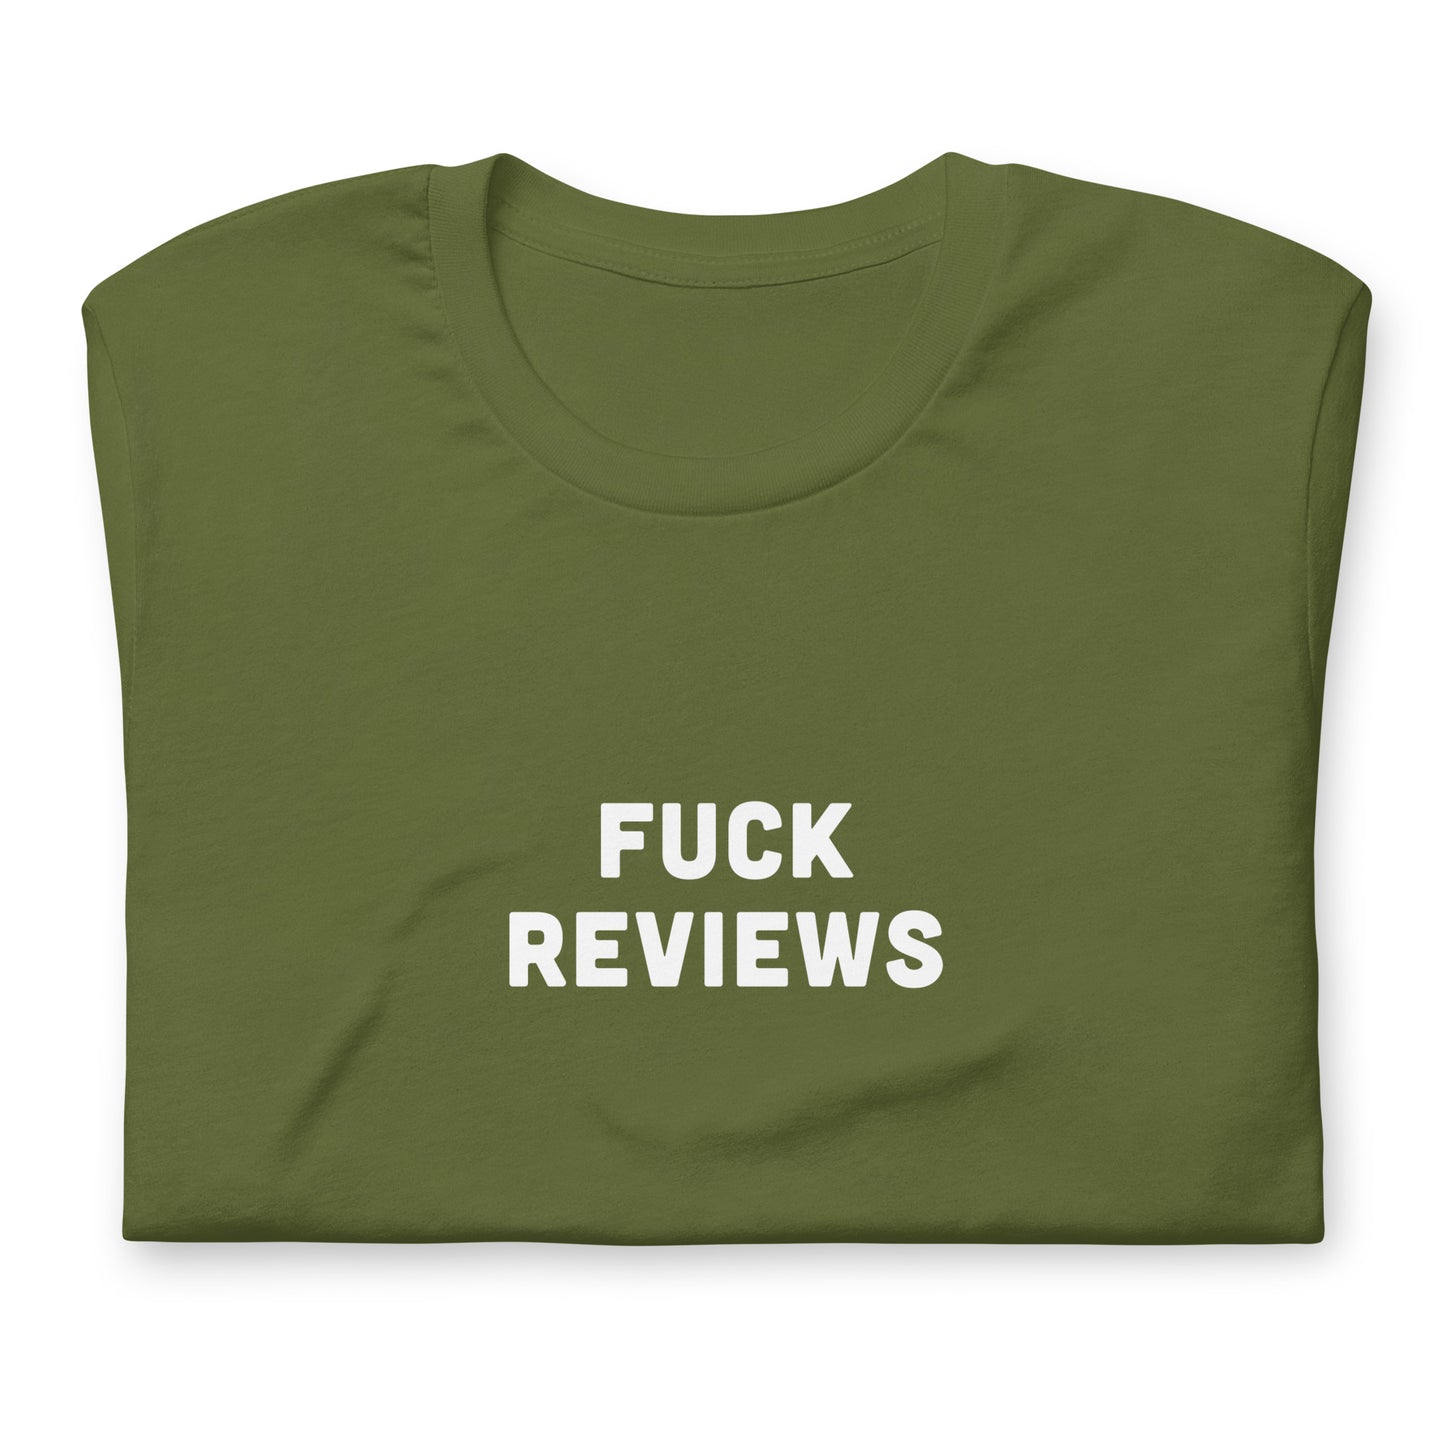 Fuck Reviews T-Shirt Size S Color Navy